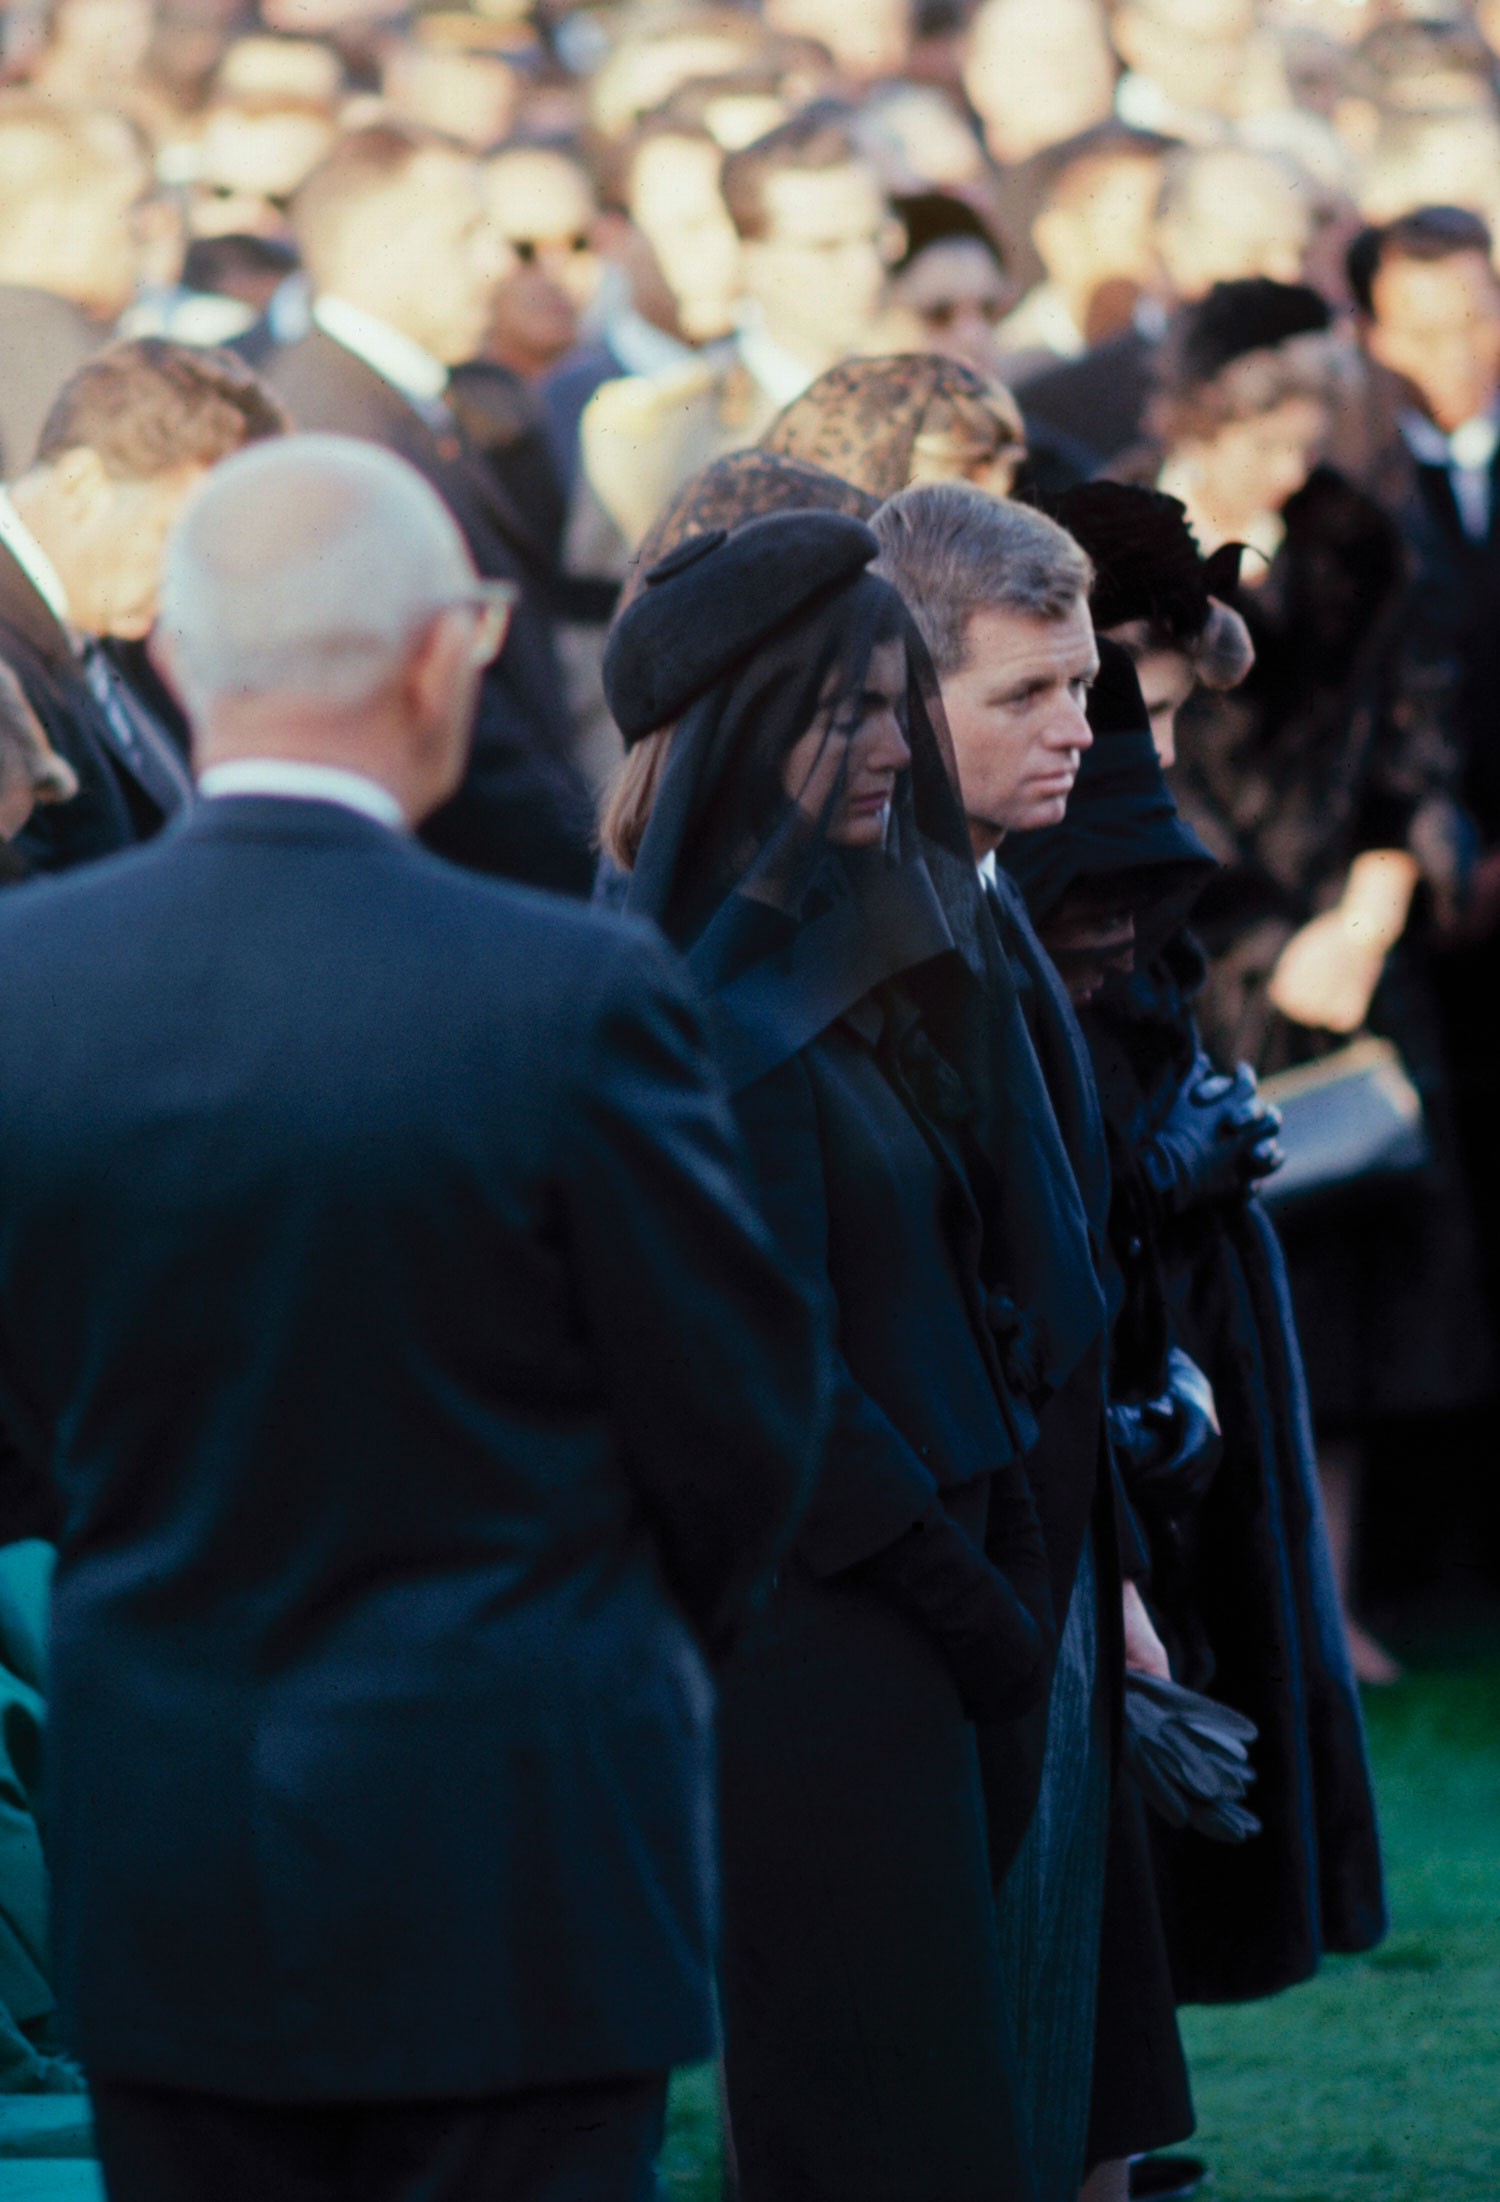 Jacqueline Kennedy and Robert Kennedy at John F. Kennedy's funeral, Arlington Cemetery, November 25, 1963.